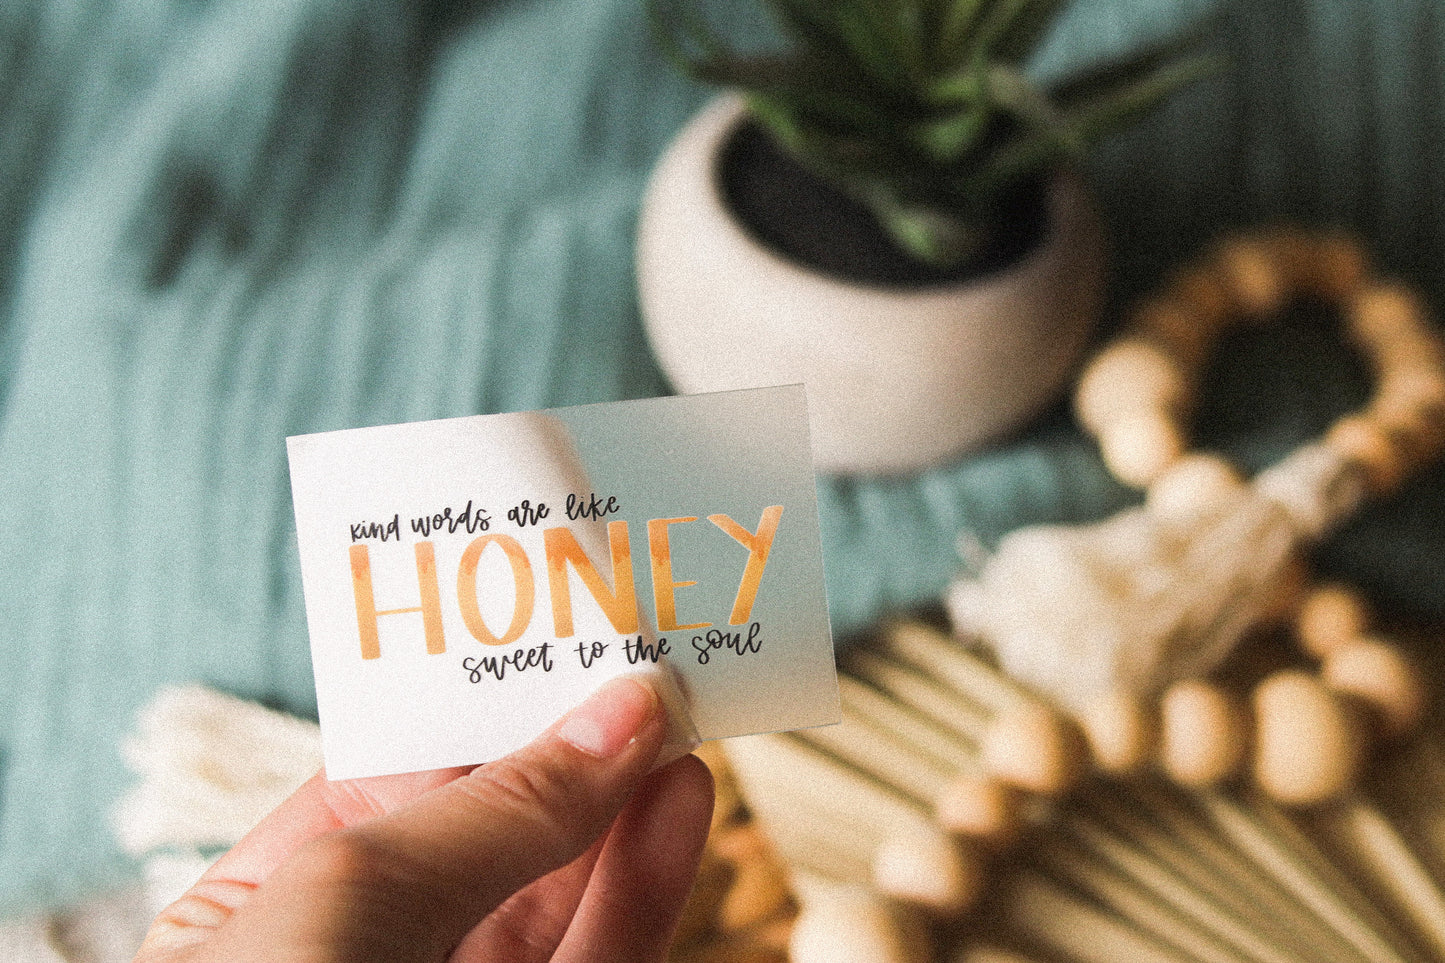 ‘Kind words are like honey, sweet to the soul’ handlettered sticker